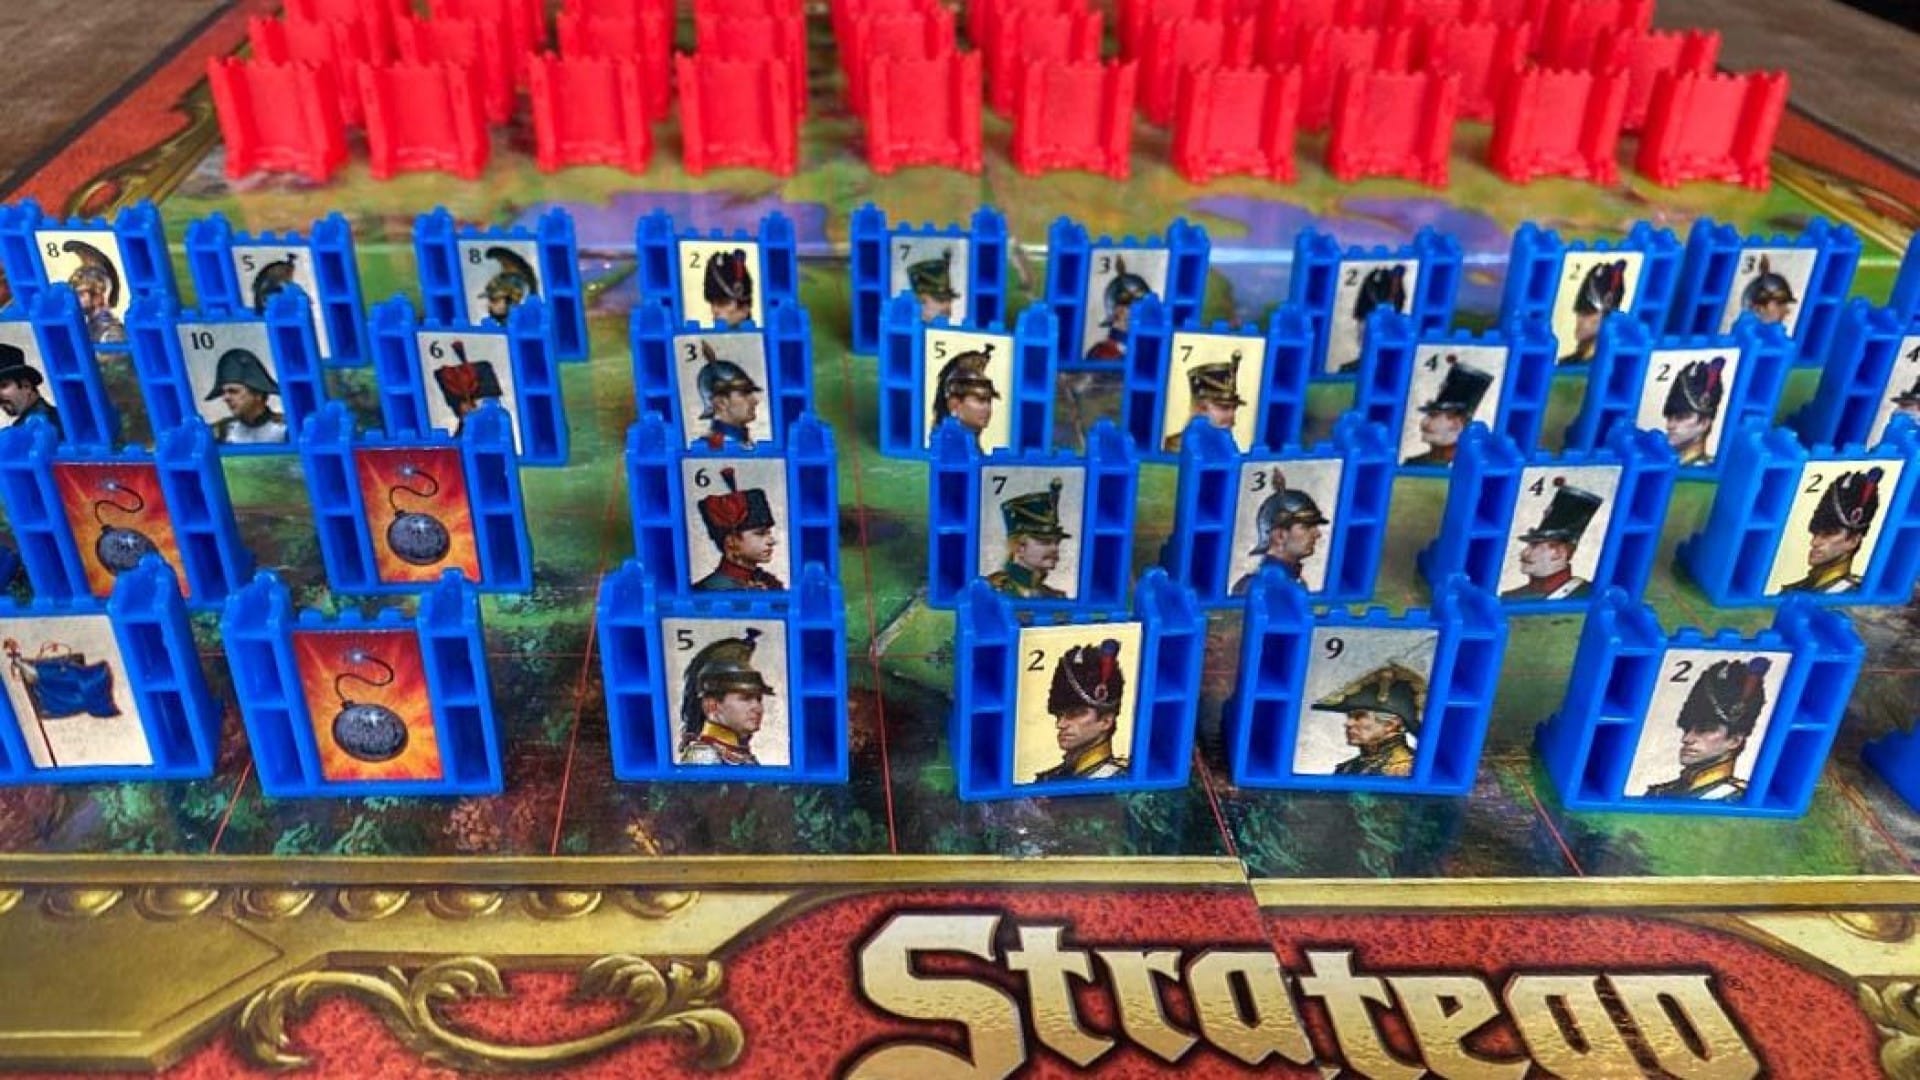 A screenshot of game pieces from the board game, Stratego.